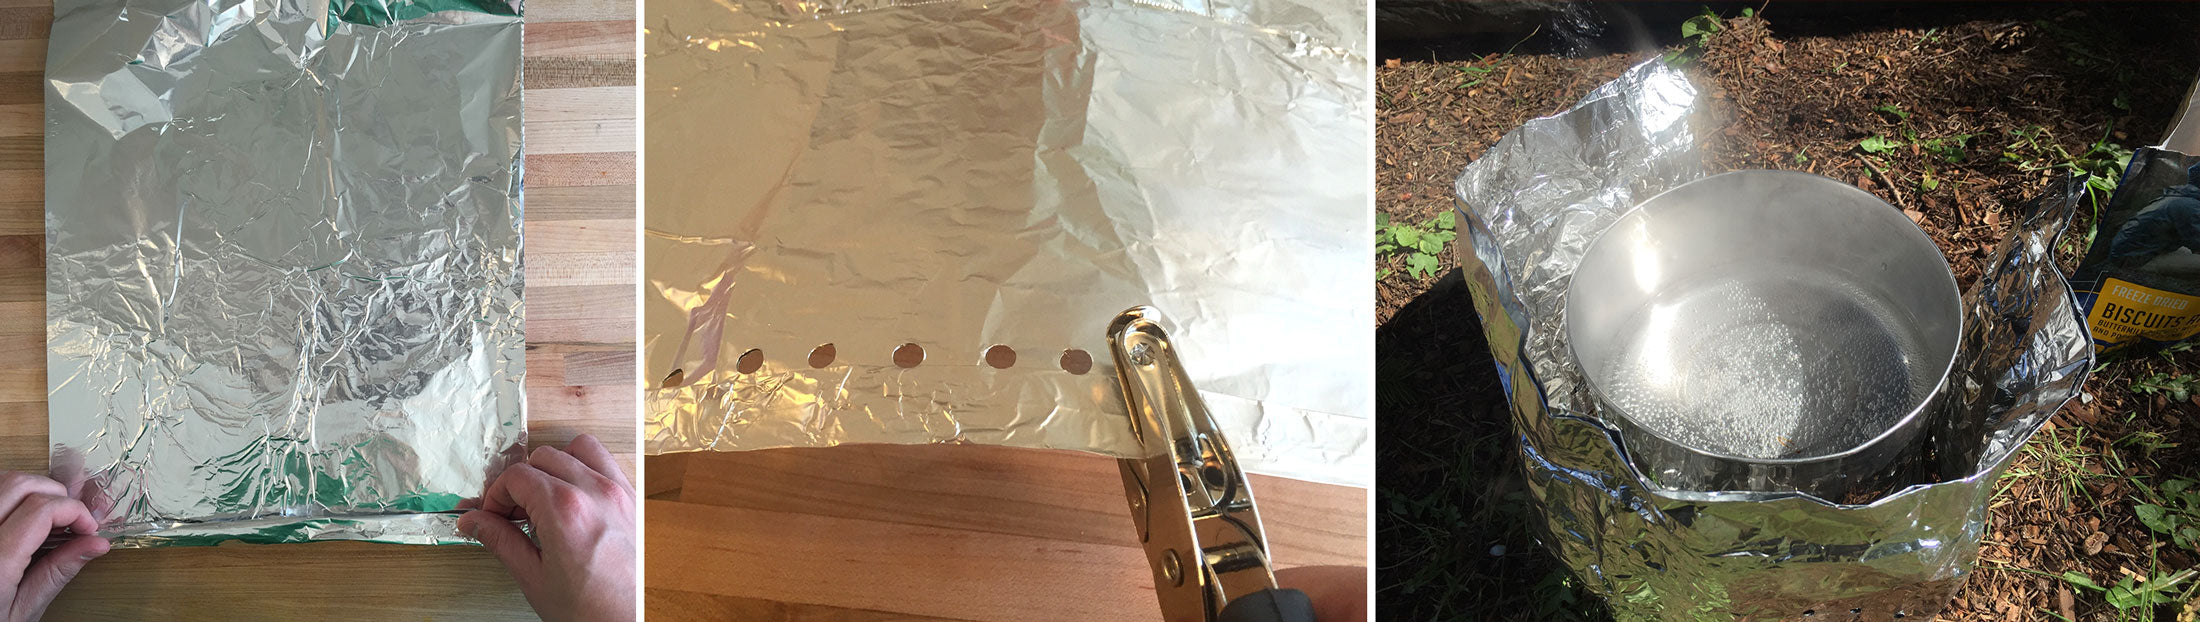 How to Make an Ultra Light Cat Food Can Backpacking Stove with a Foil Windscreen